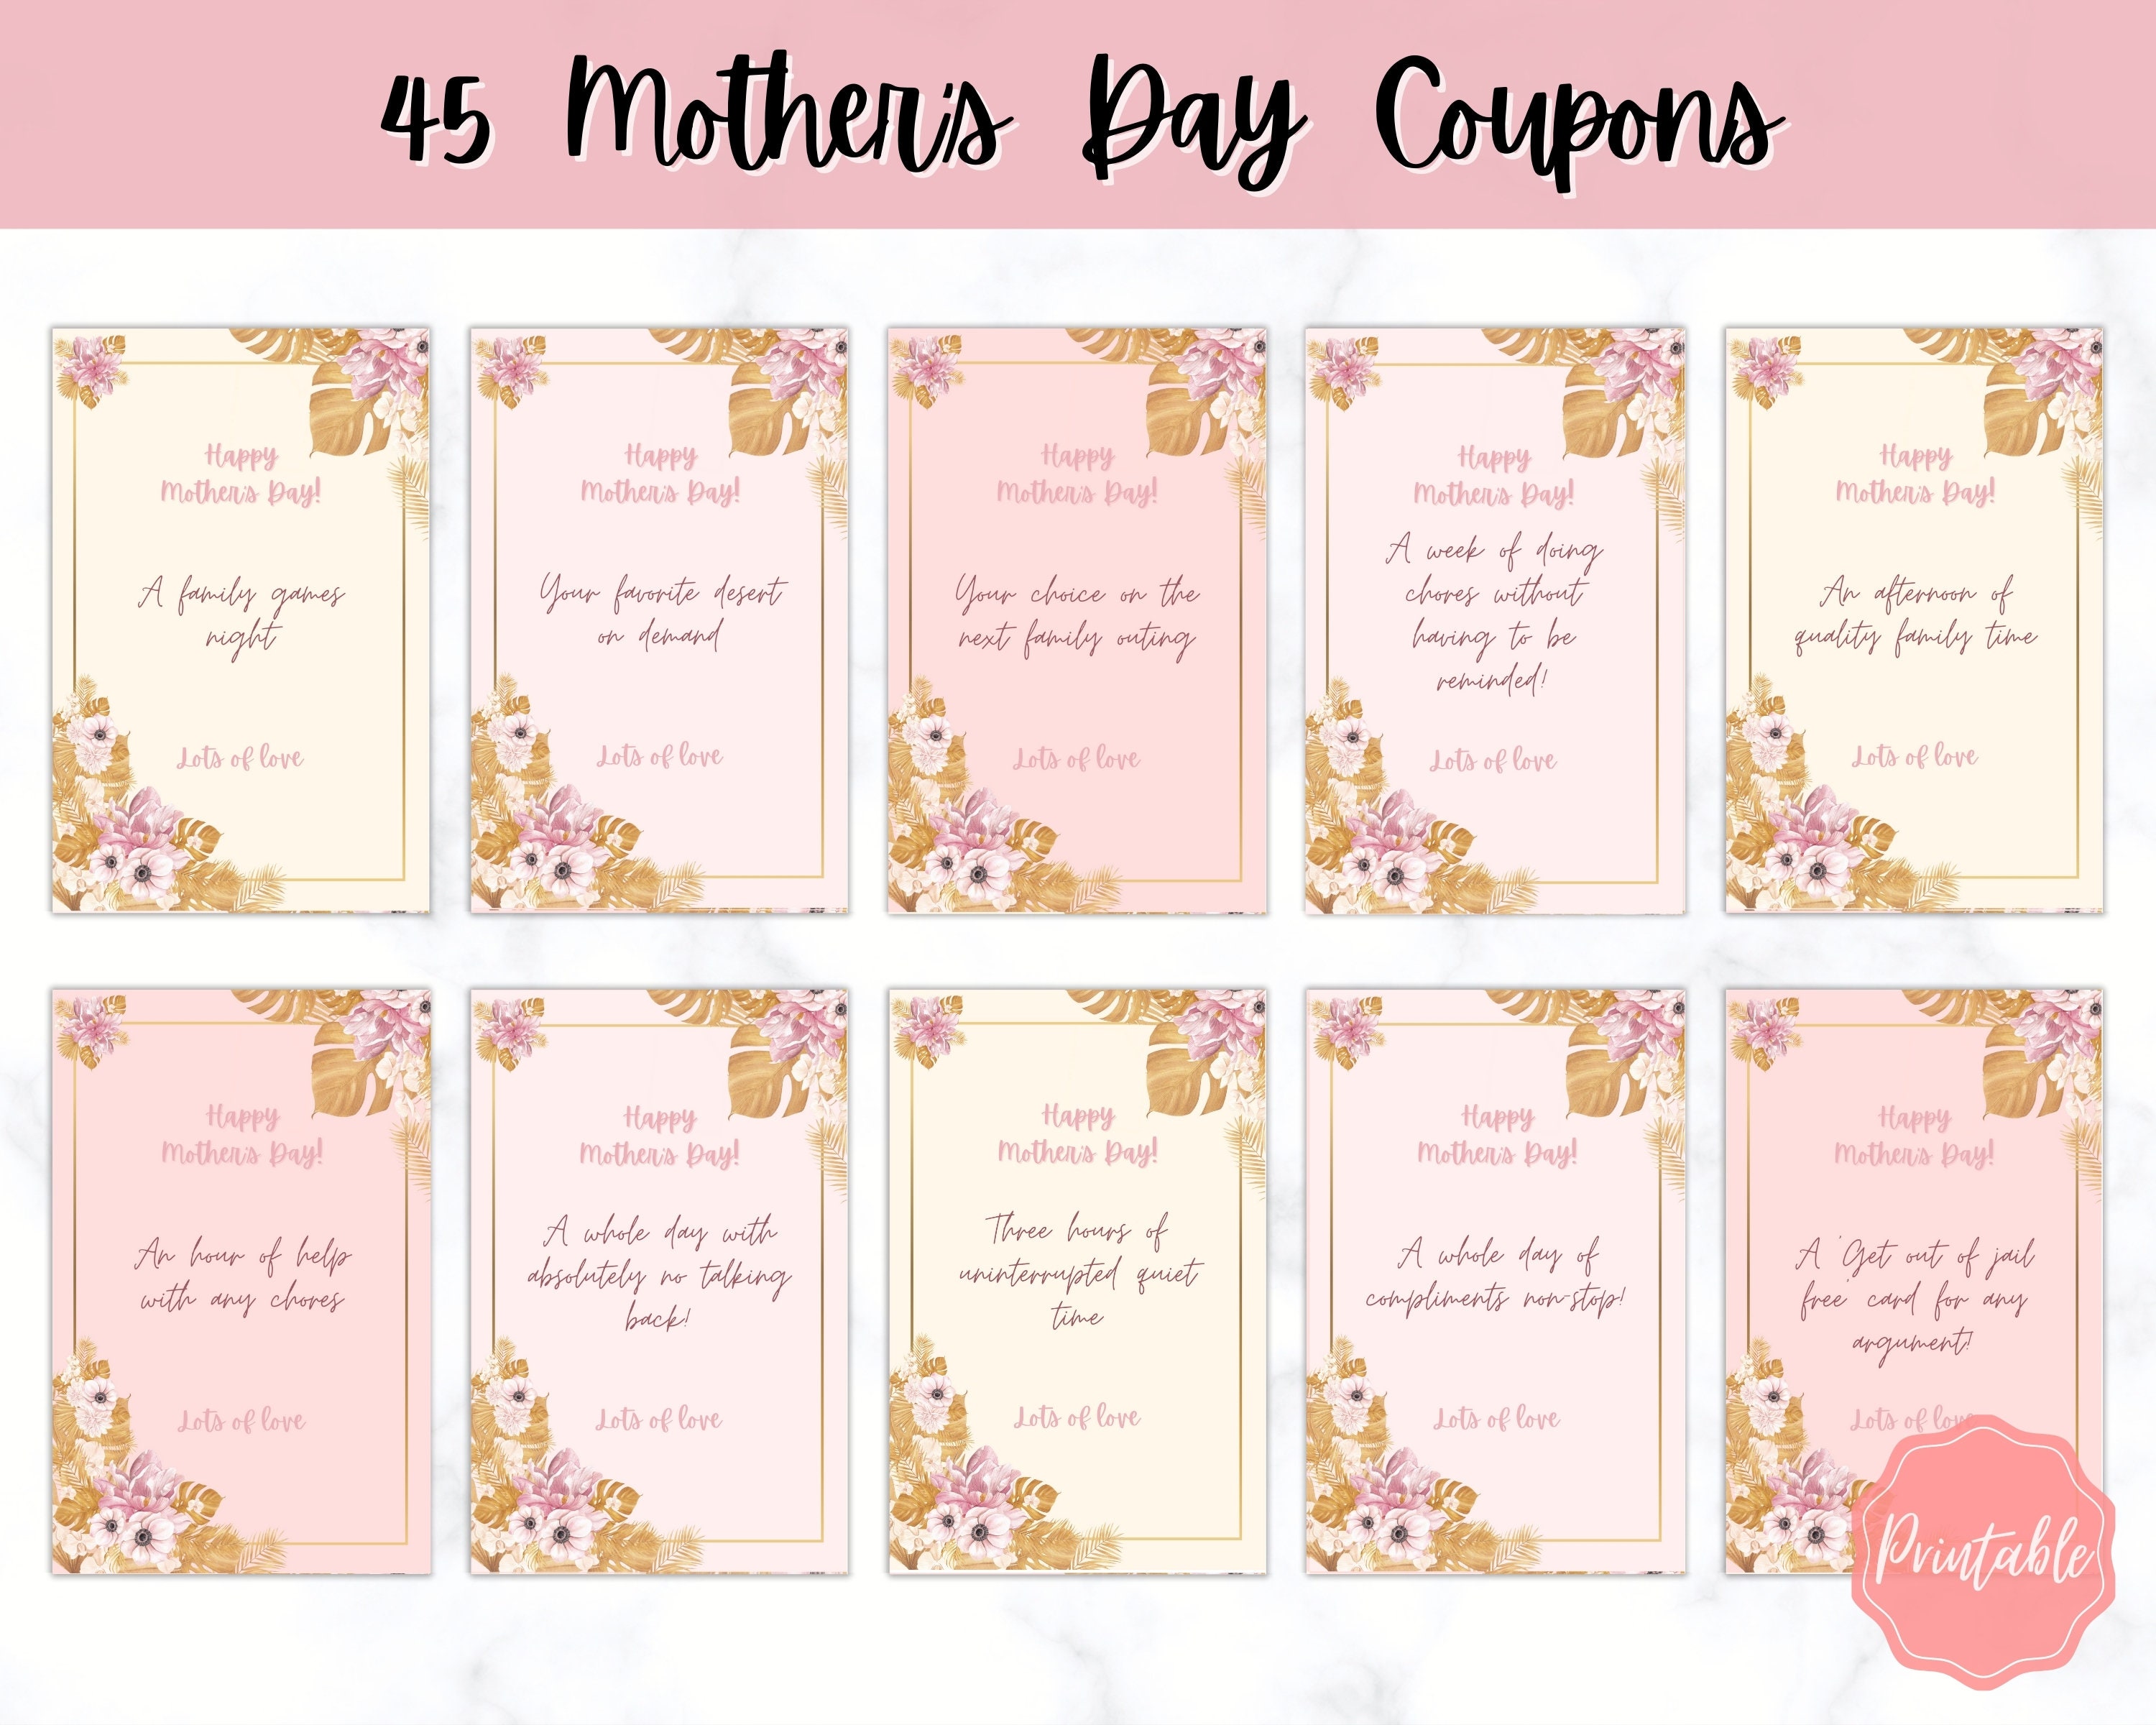 Mother's Day Gift Card